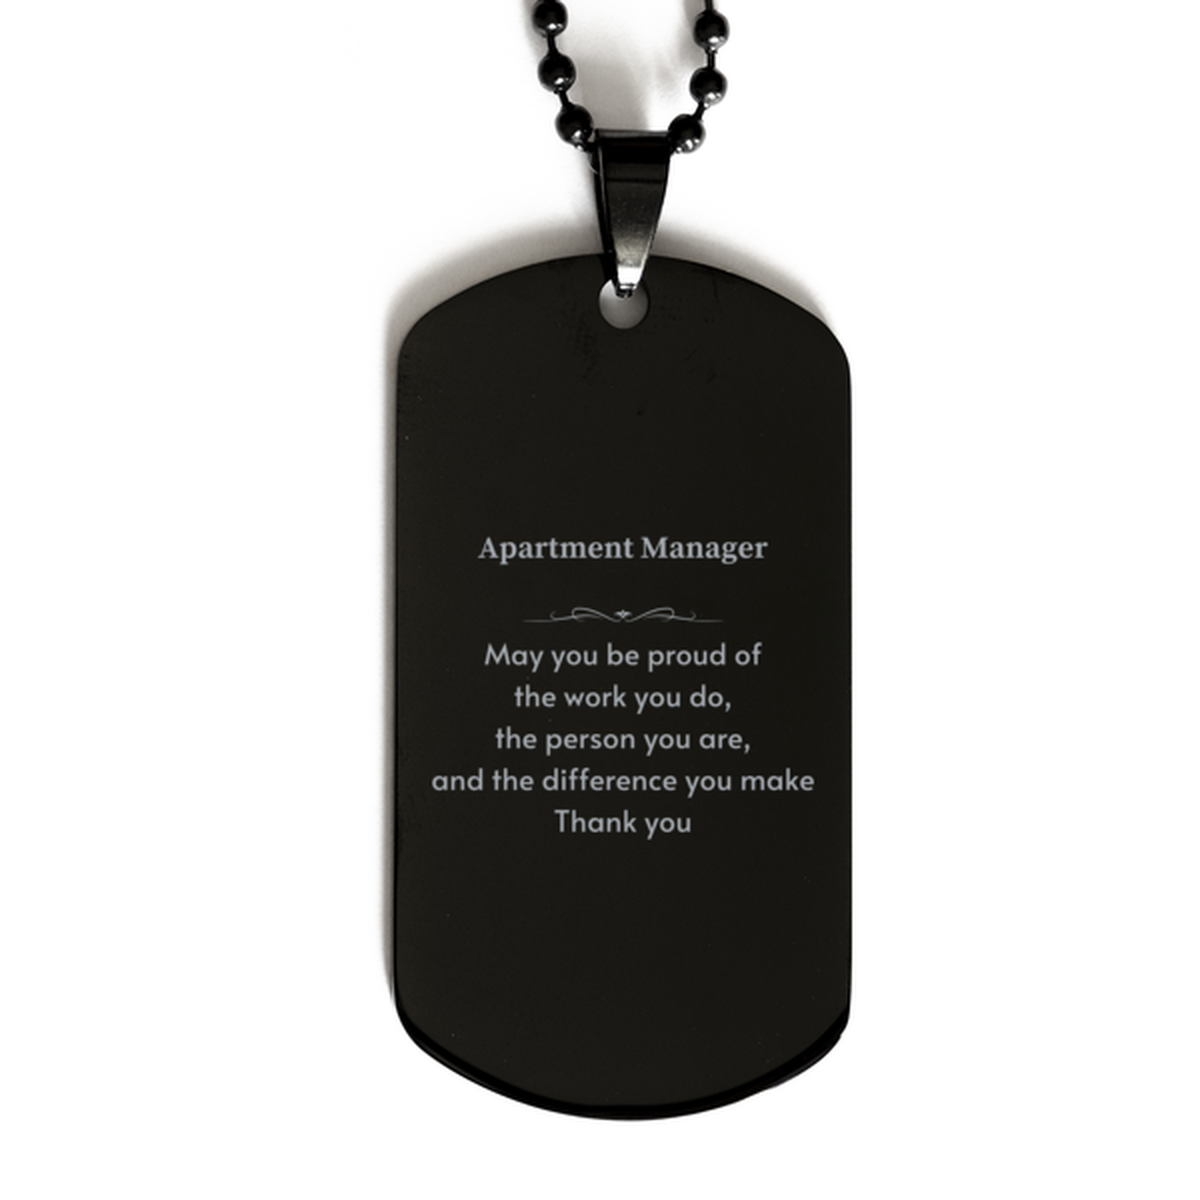 Heartwarming Black Dog Tag Retirement Coworkers Gifts for Apartment Manager, Apartment Manager May You be proud of the work you do, the person you are Gifts for Boss Men Women Friends